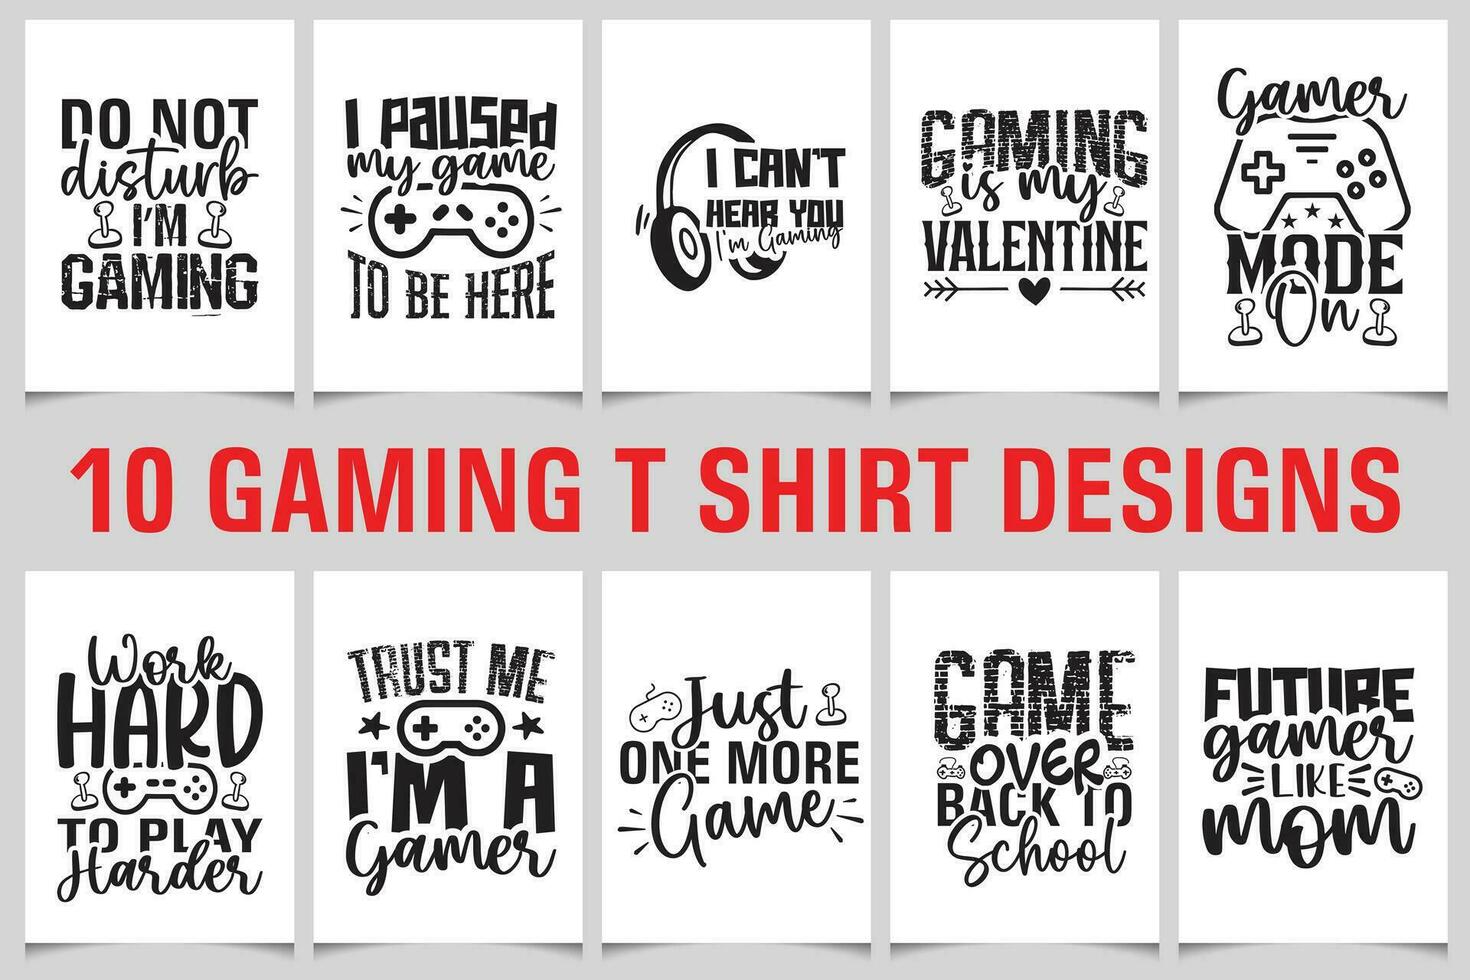 Gaming t shirt design bundle - Gaming typography design - Gamer - Birthday Gift Boys - Dowload File - Controller - I Paused My Game To Be Here vector